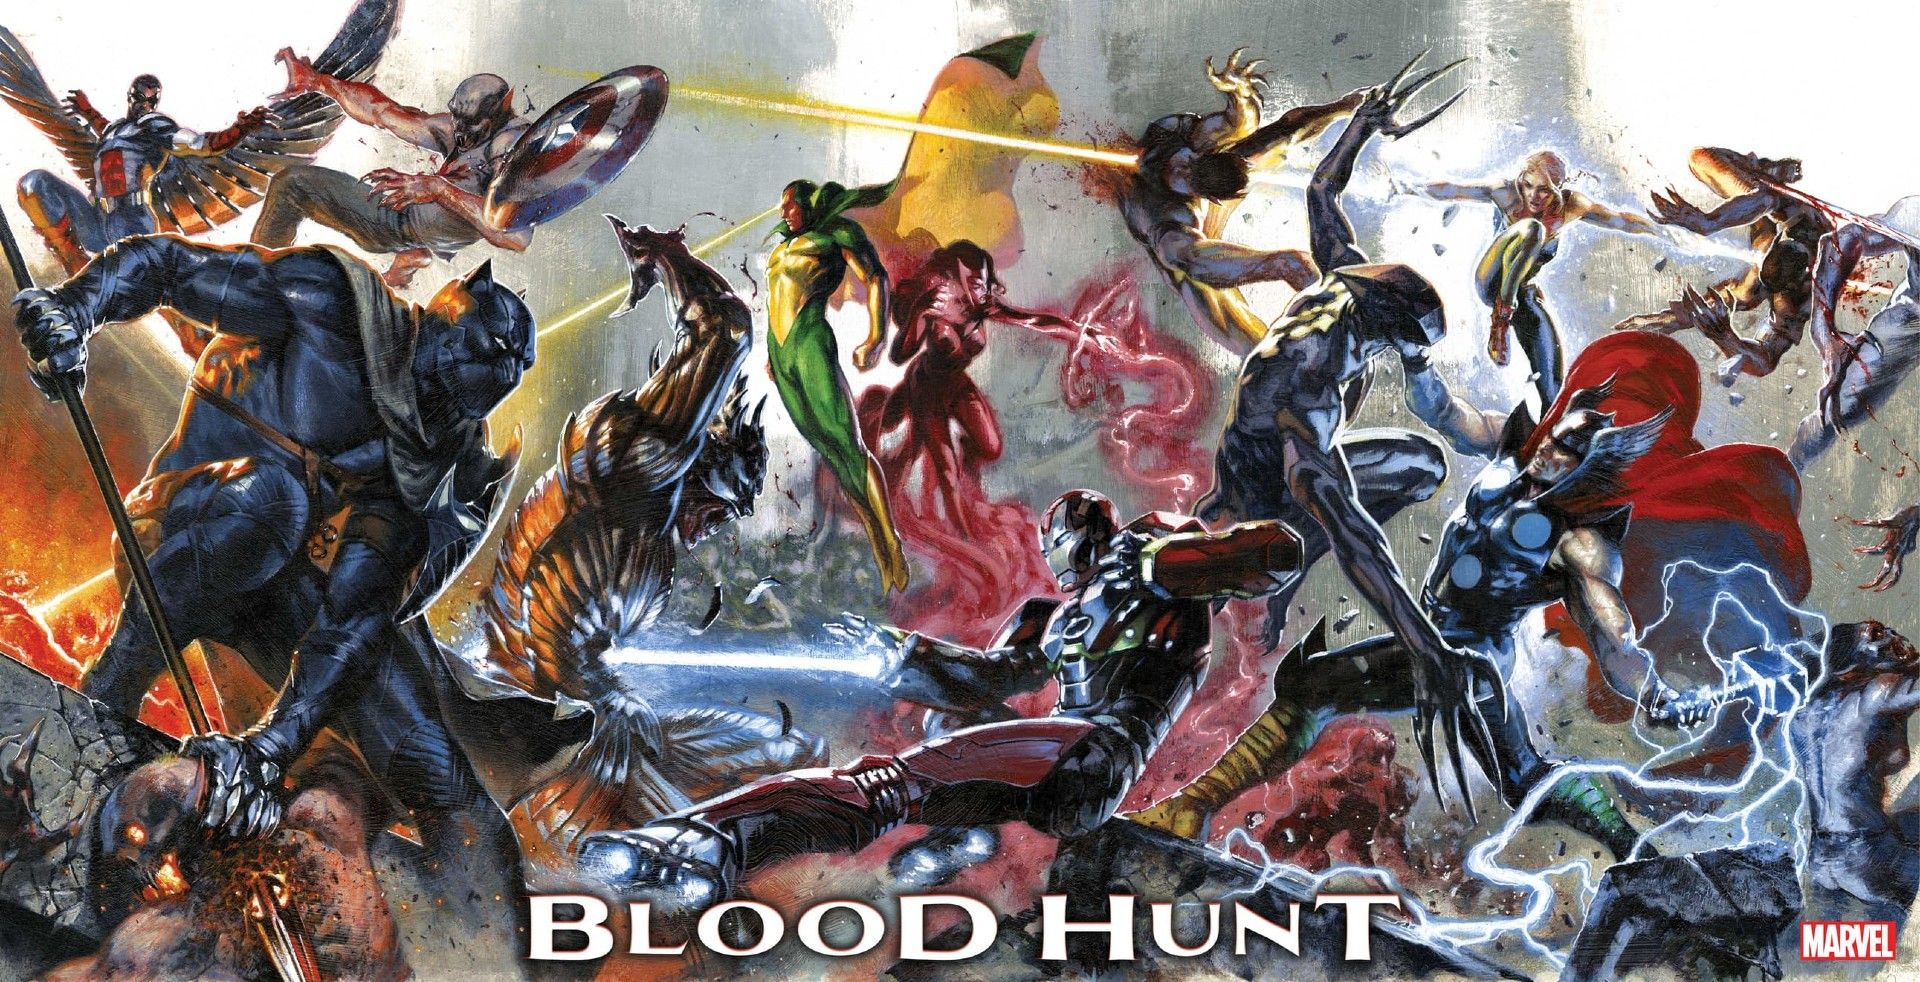 Avengers vs. Bloodcoven: Marvel Heroes Battle Vampire Army in Epic BLOOD HUNT Cover Art